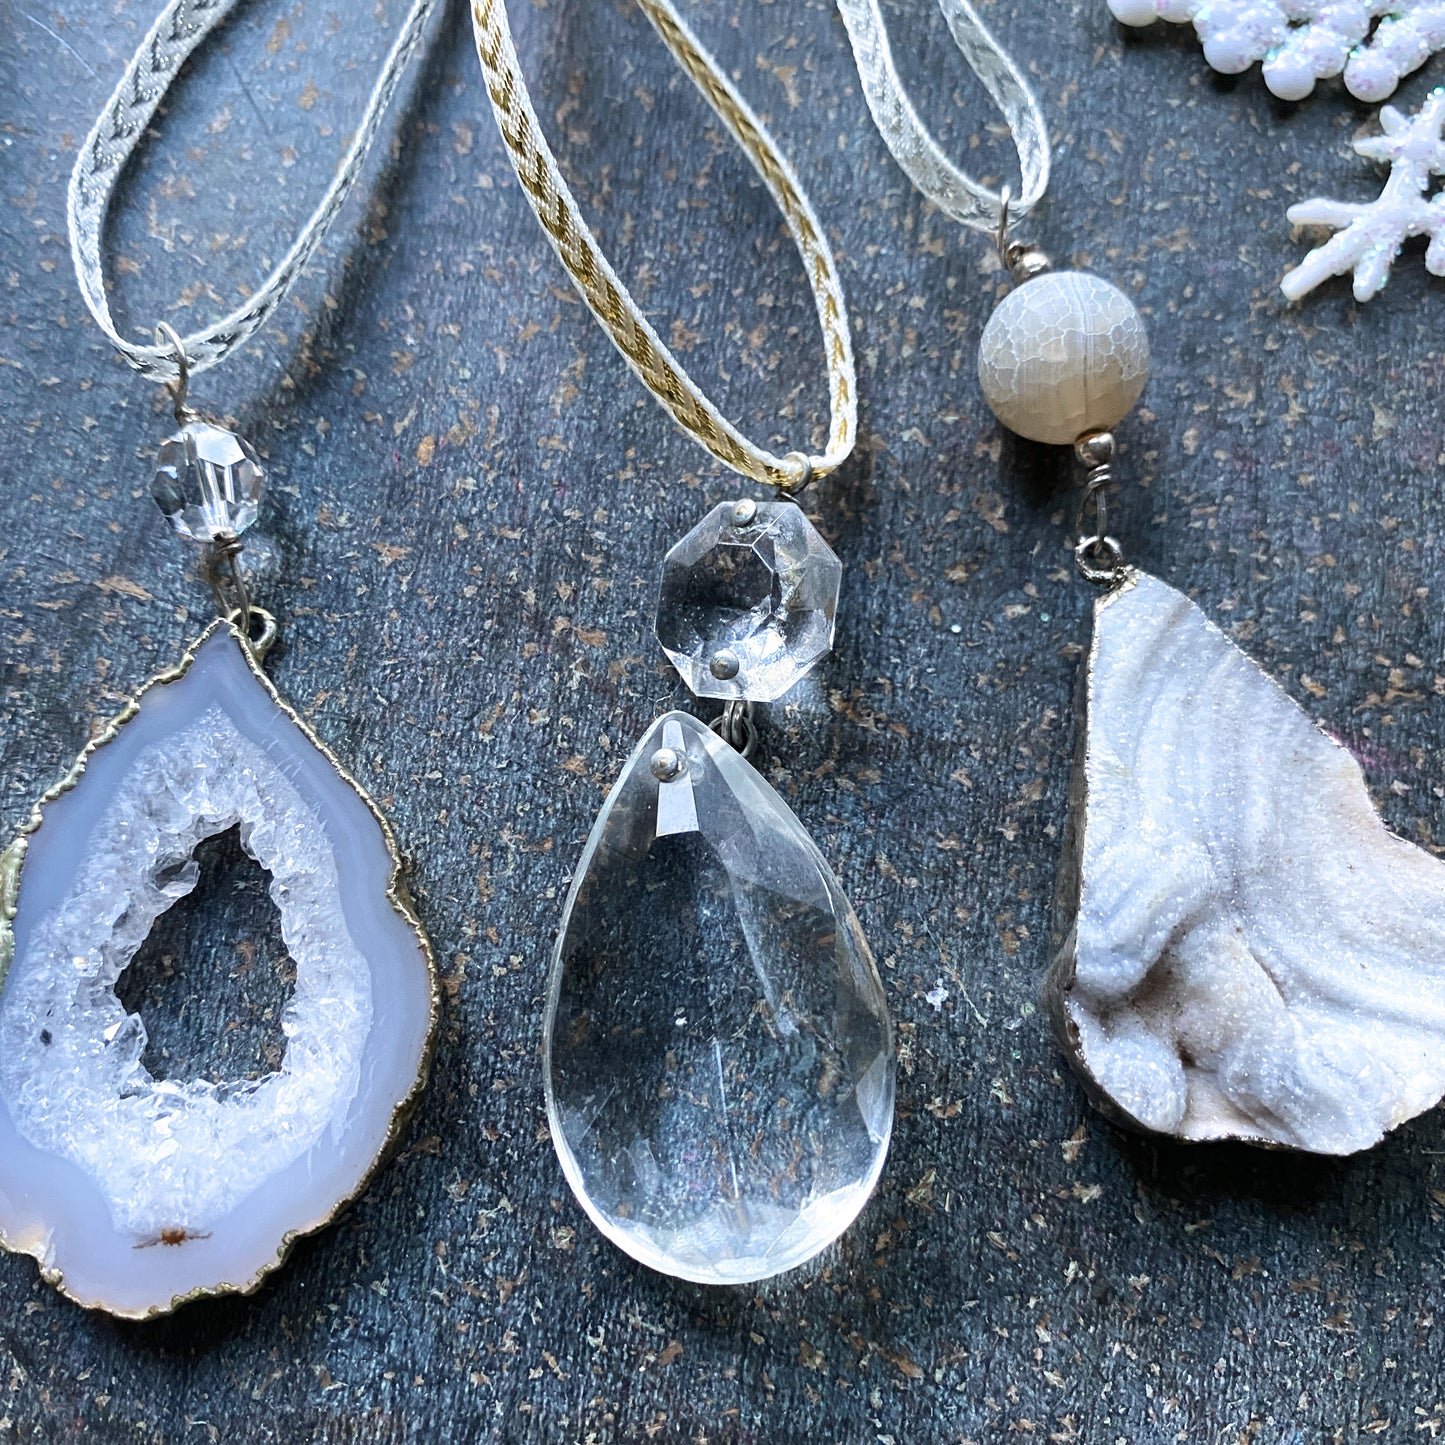 Geode and Crystal Ornament Assortment